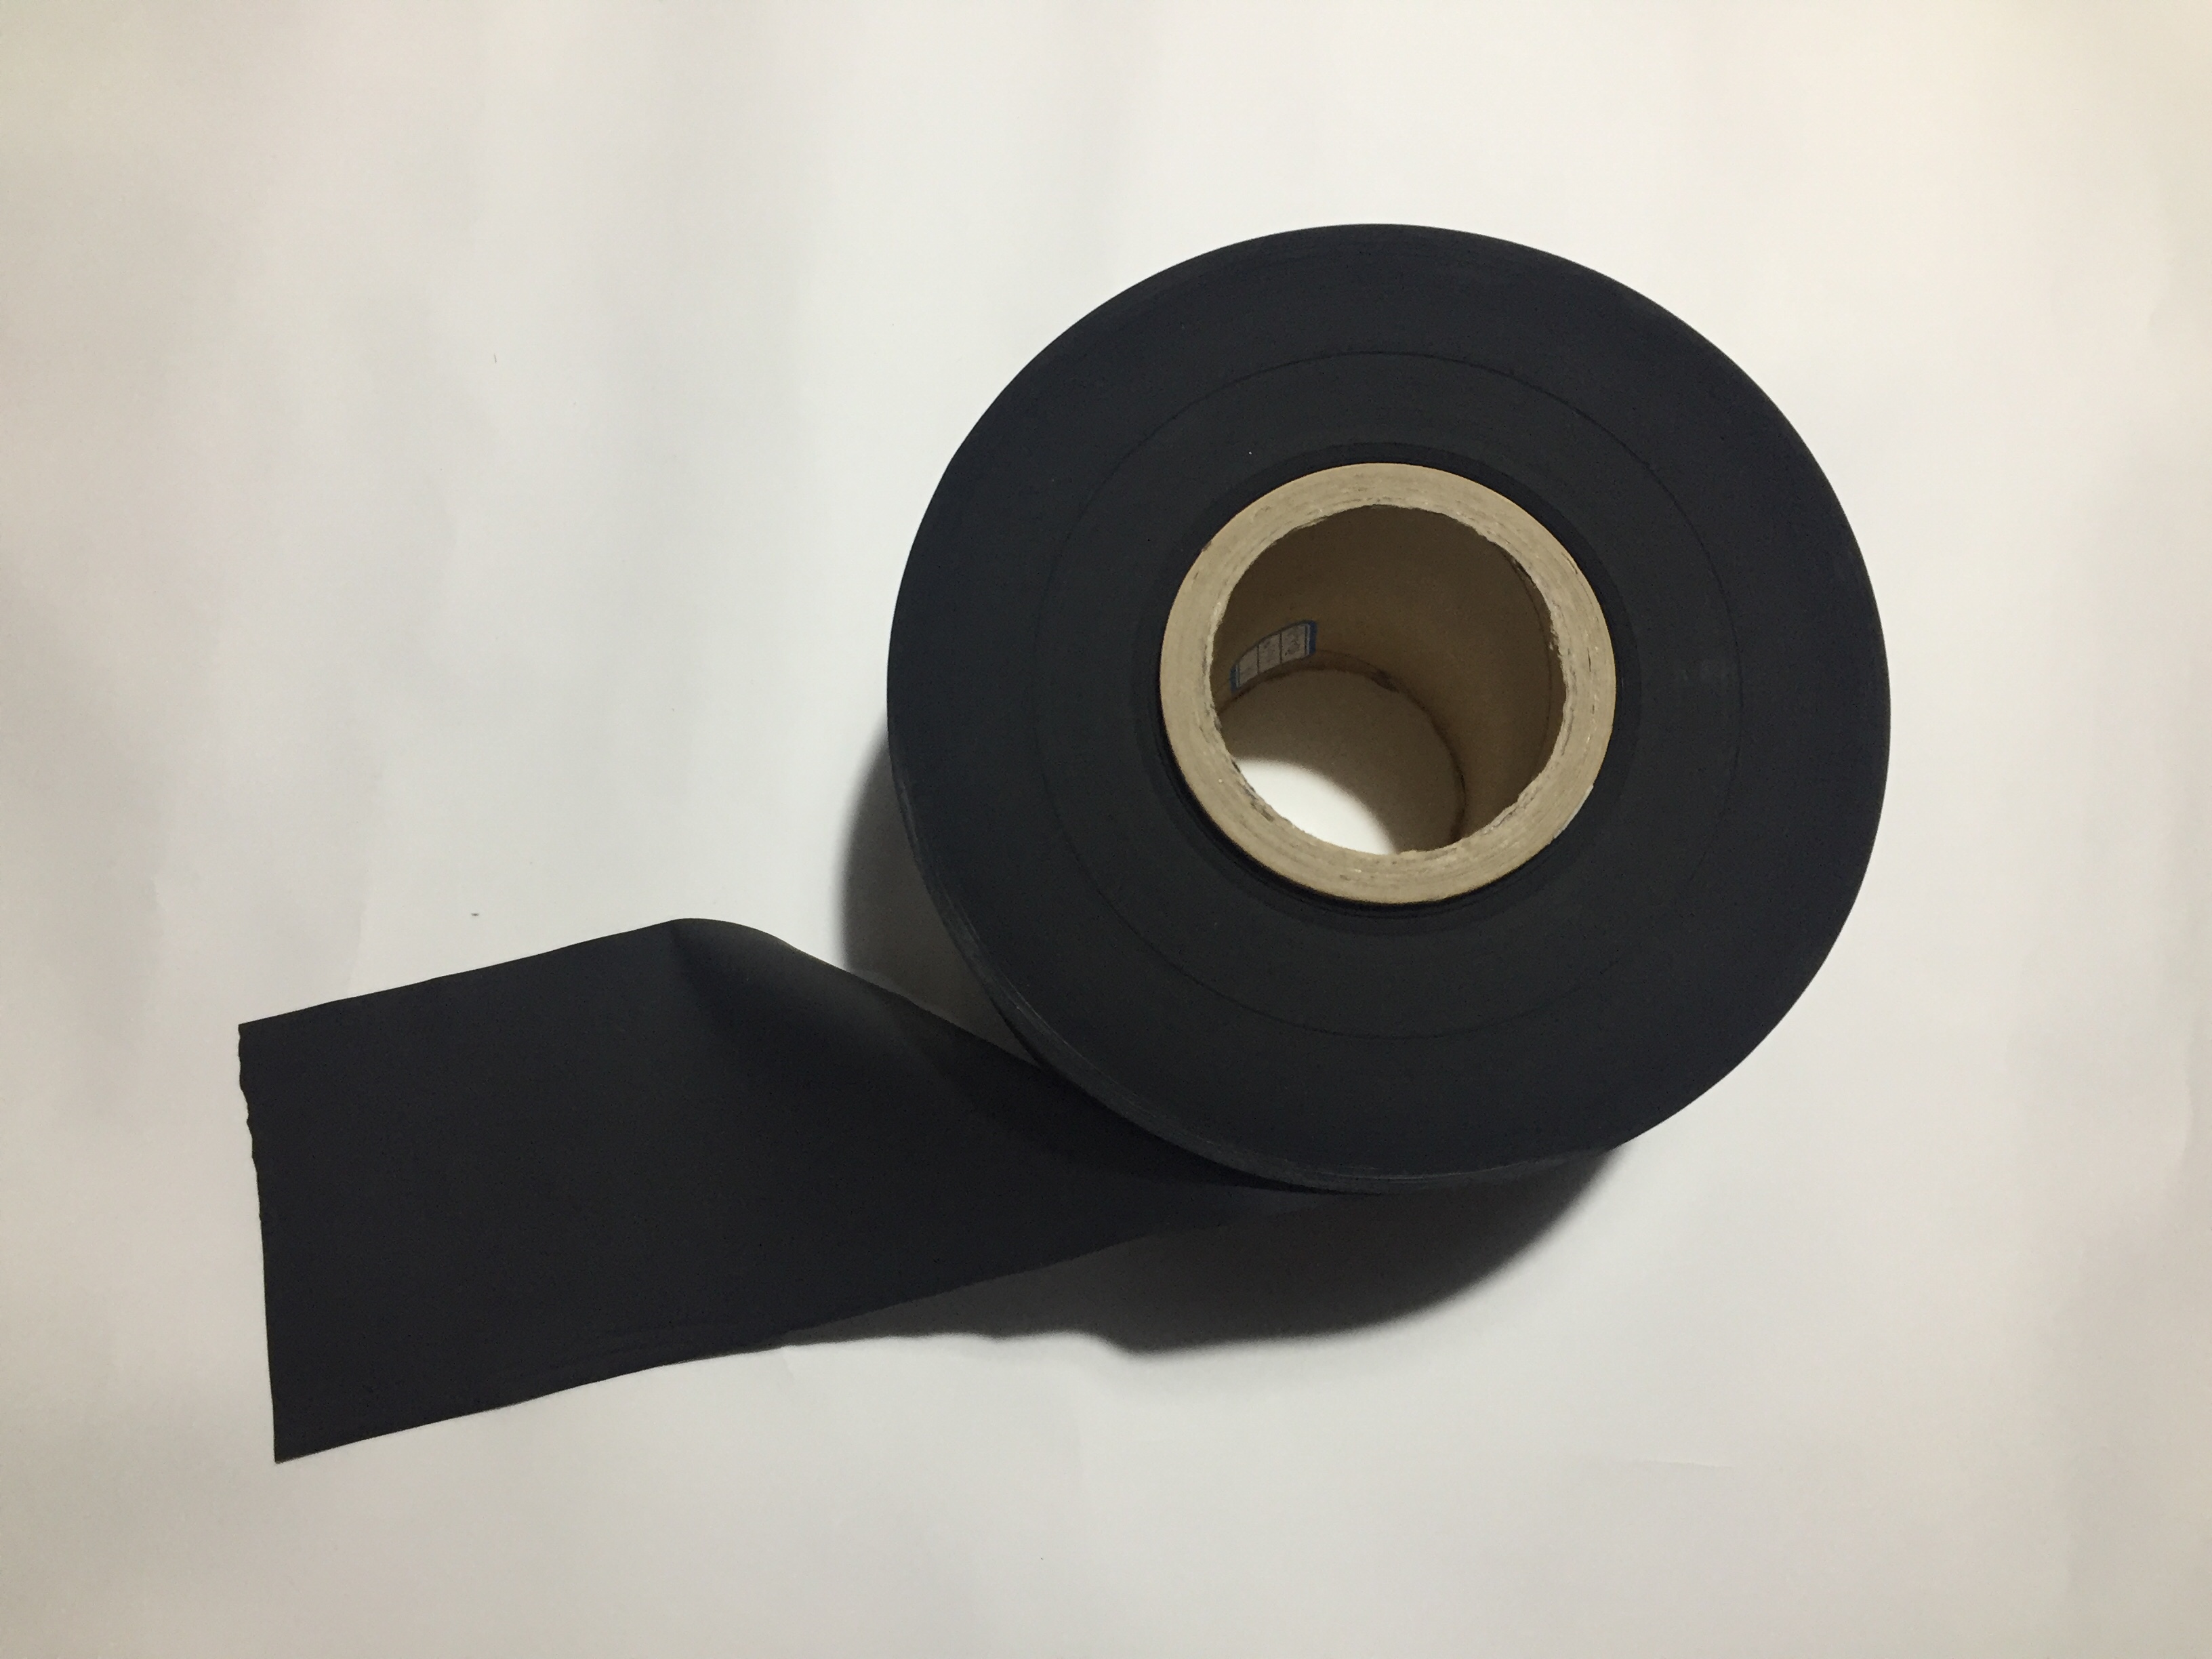 Roll Natural Thermal Black carbon conductive film For Ekg